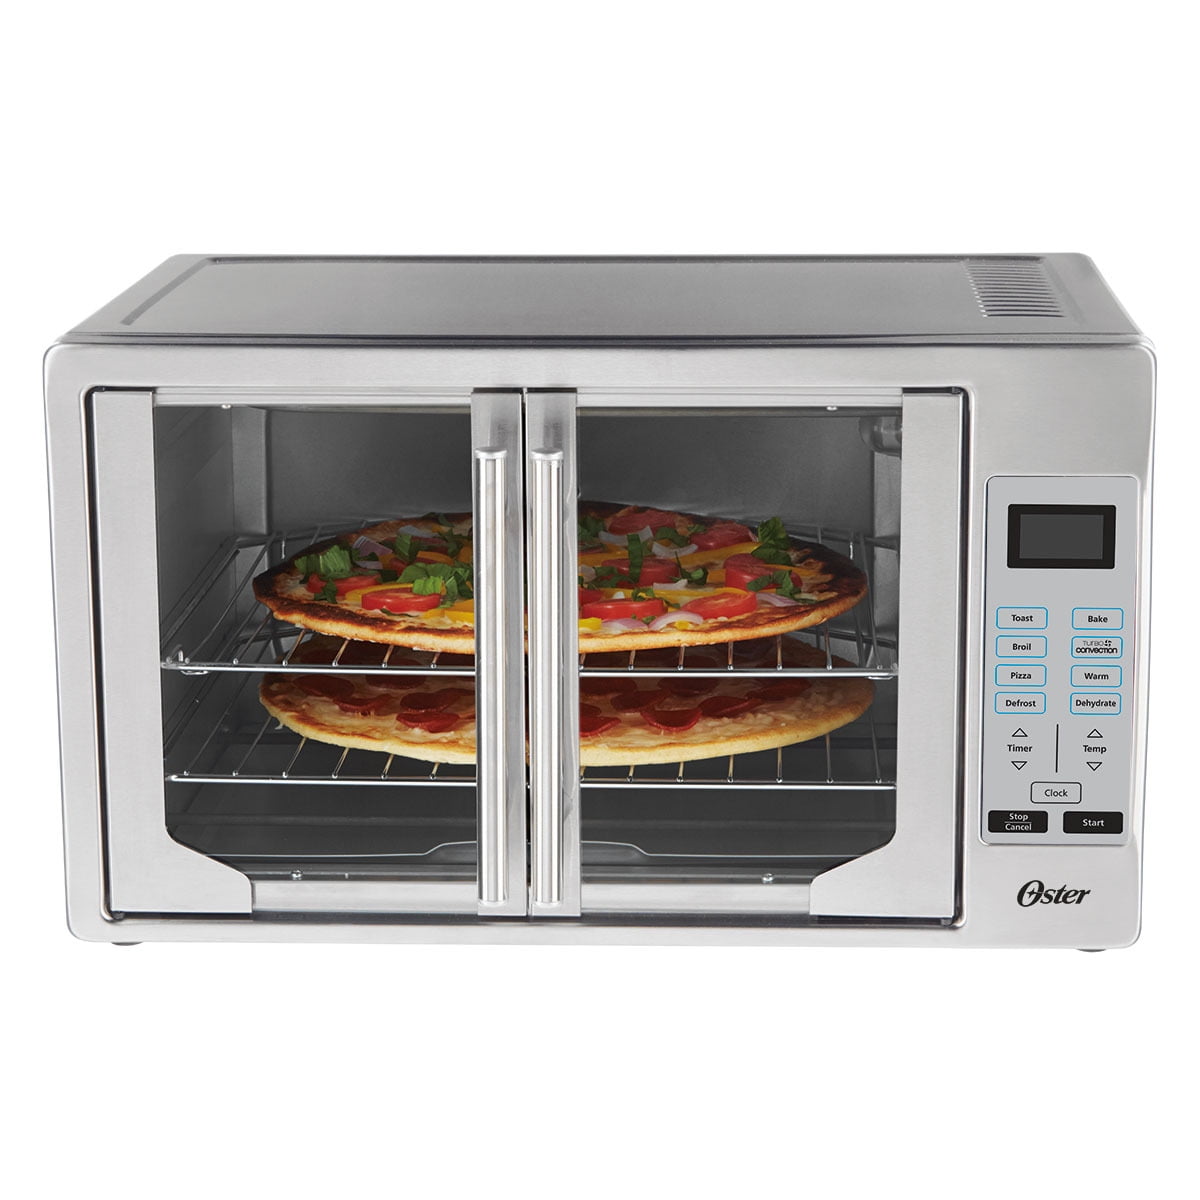 FIRST LOOK Oster XL French Door Convection Oven Pizza 